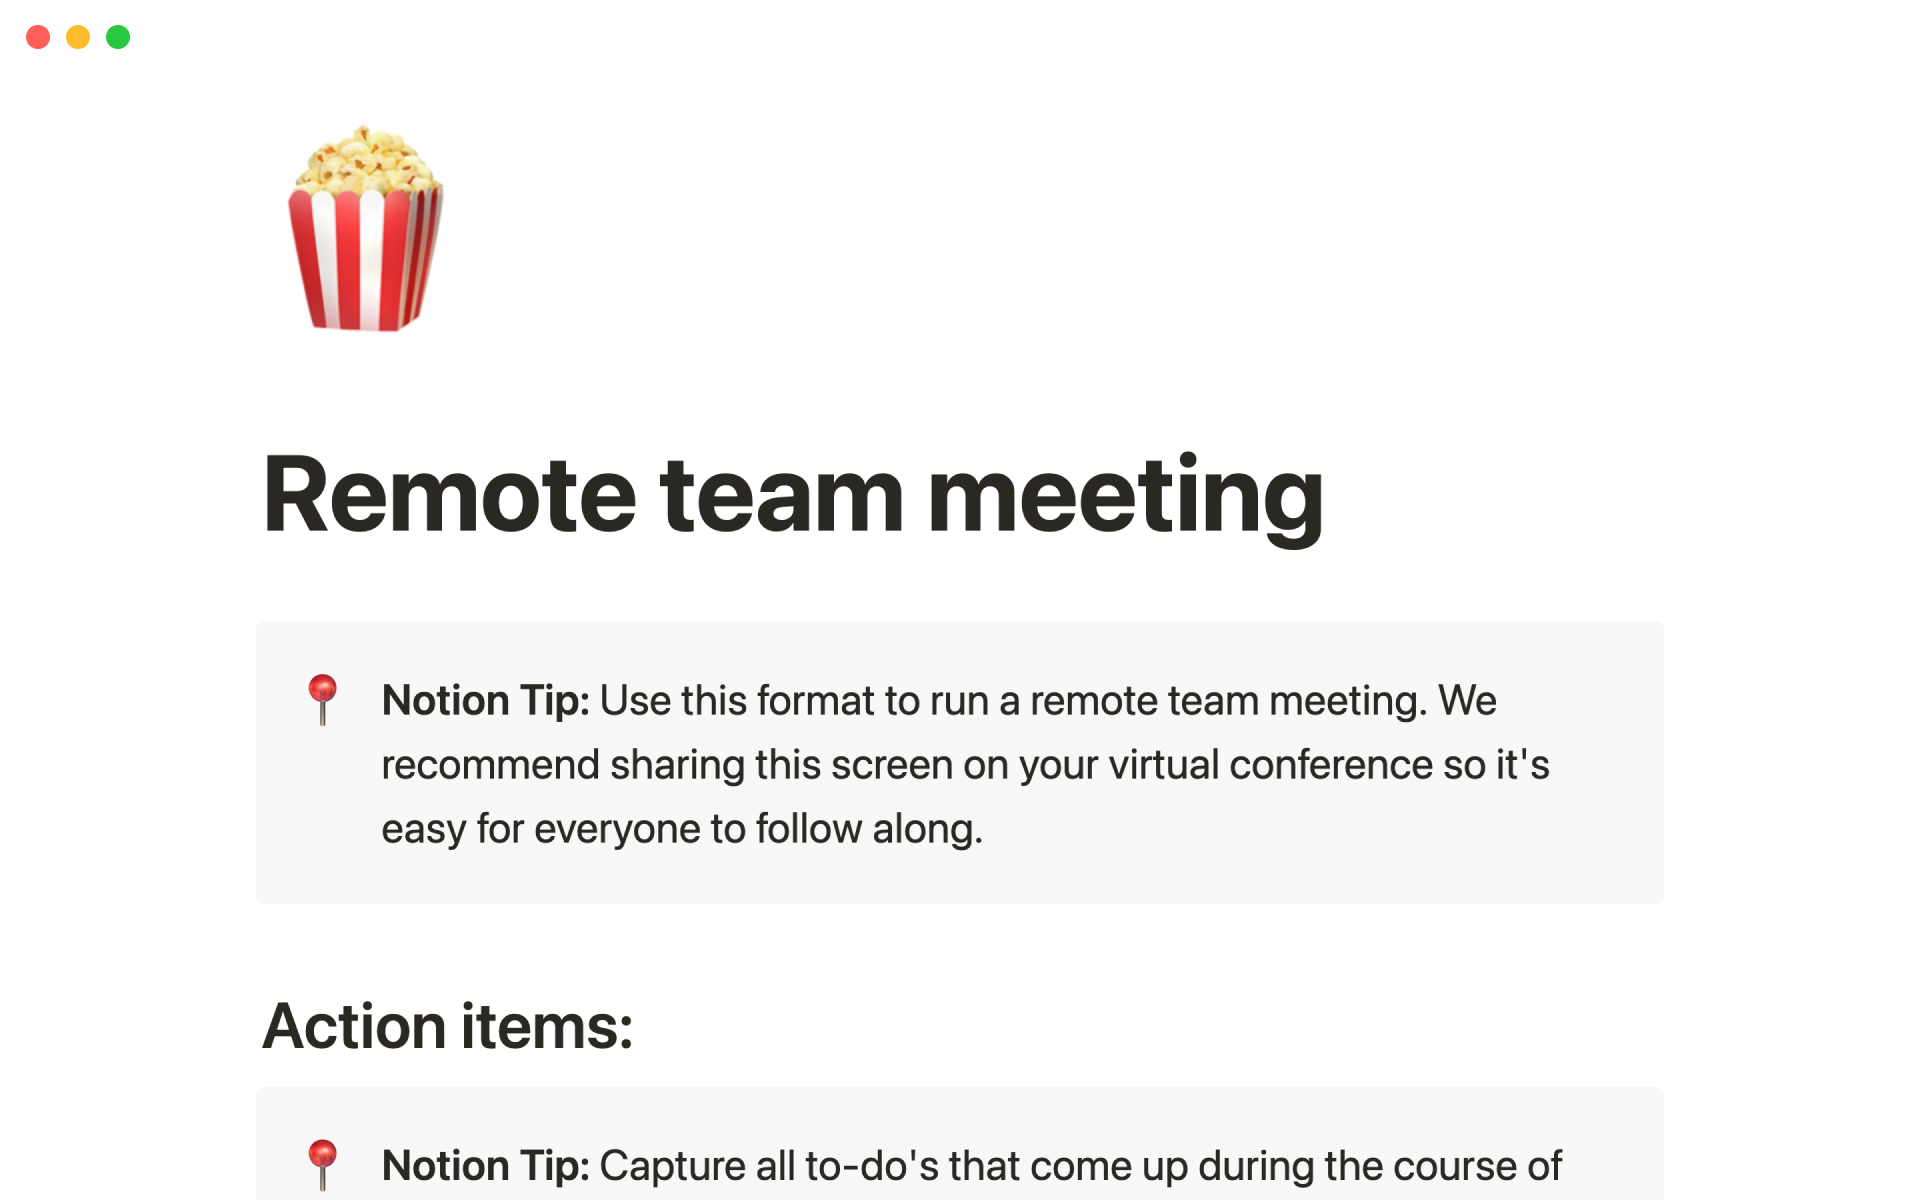  The desktop image for the Nonprofit remote team meeting template